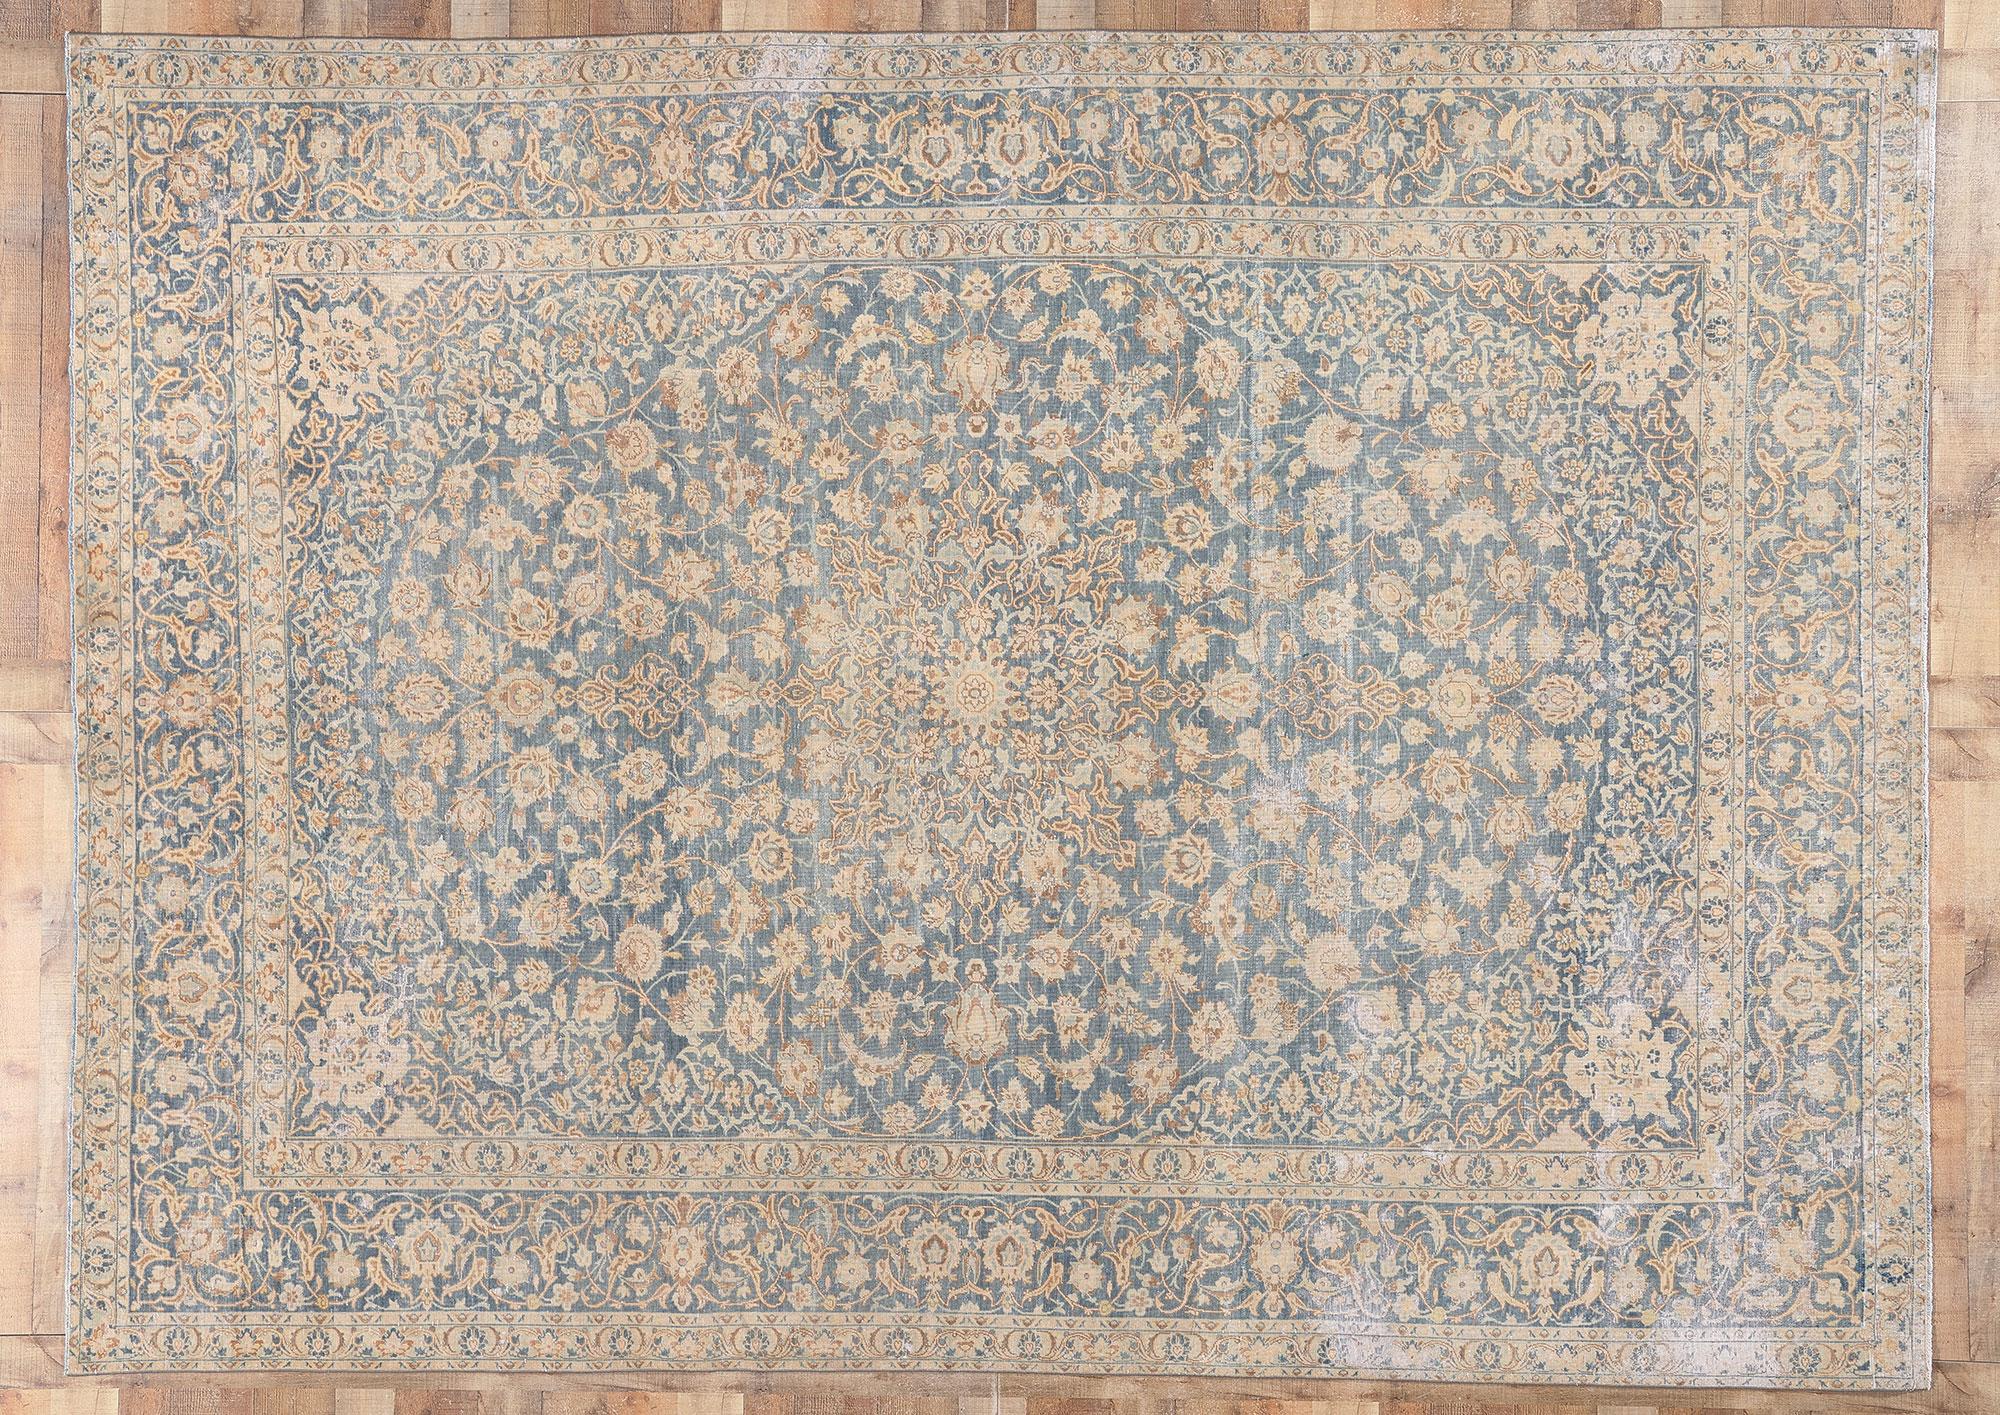 Distressed Antique Persian Tabriz Rug, Faded Soft Earth-Tone Colors For Sale 3